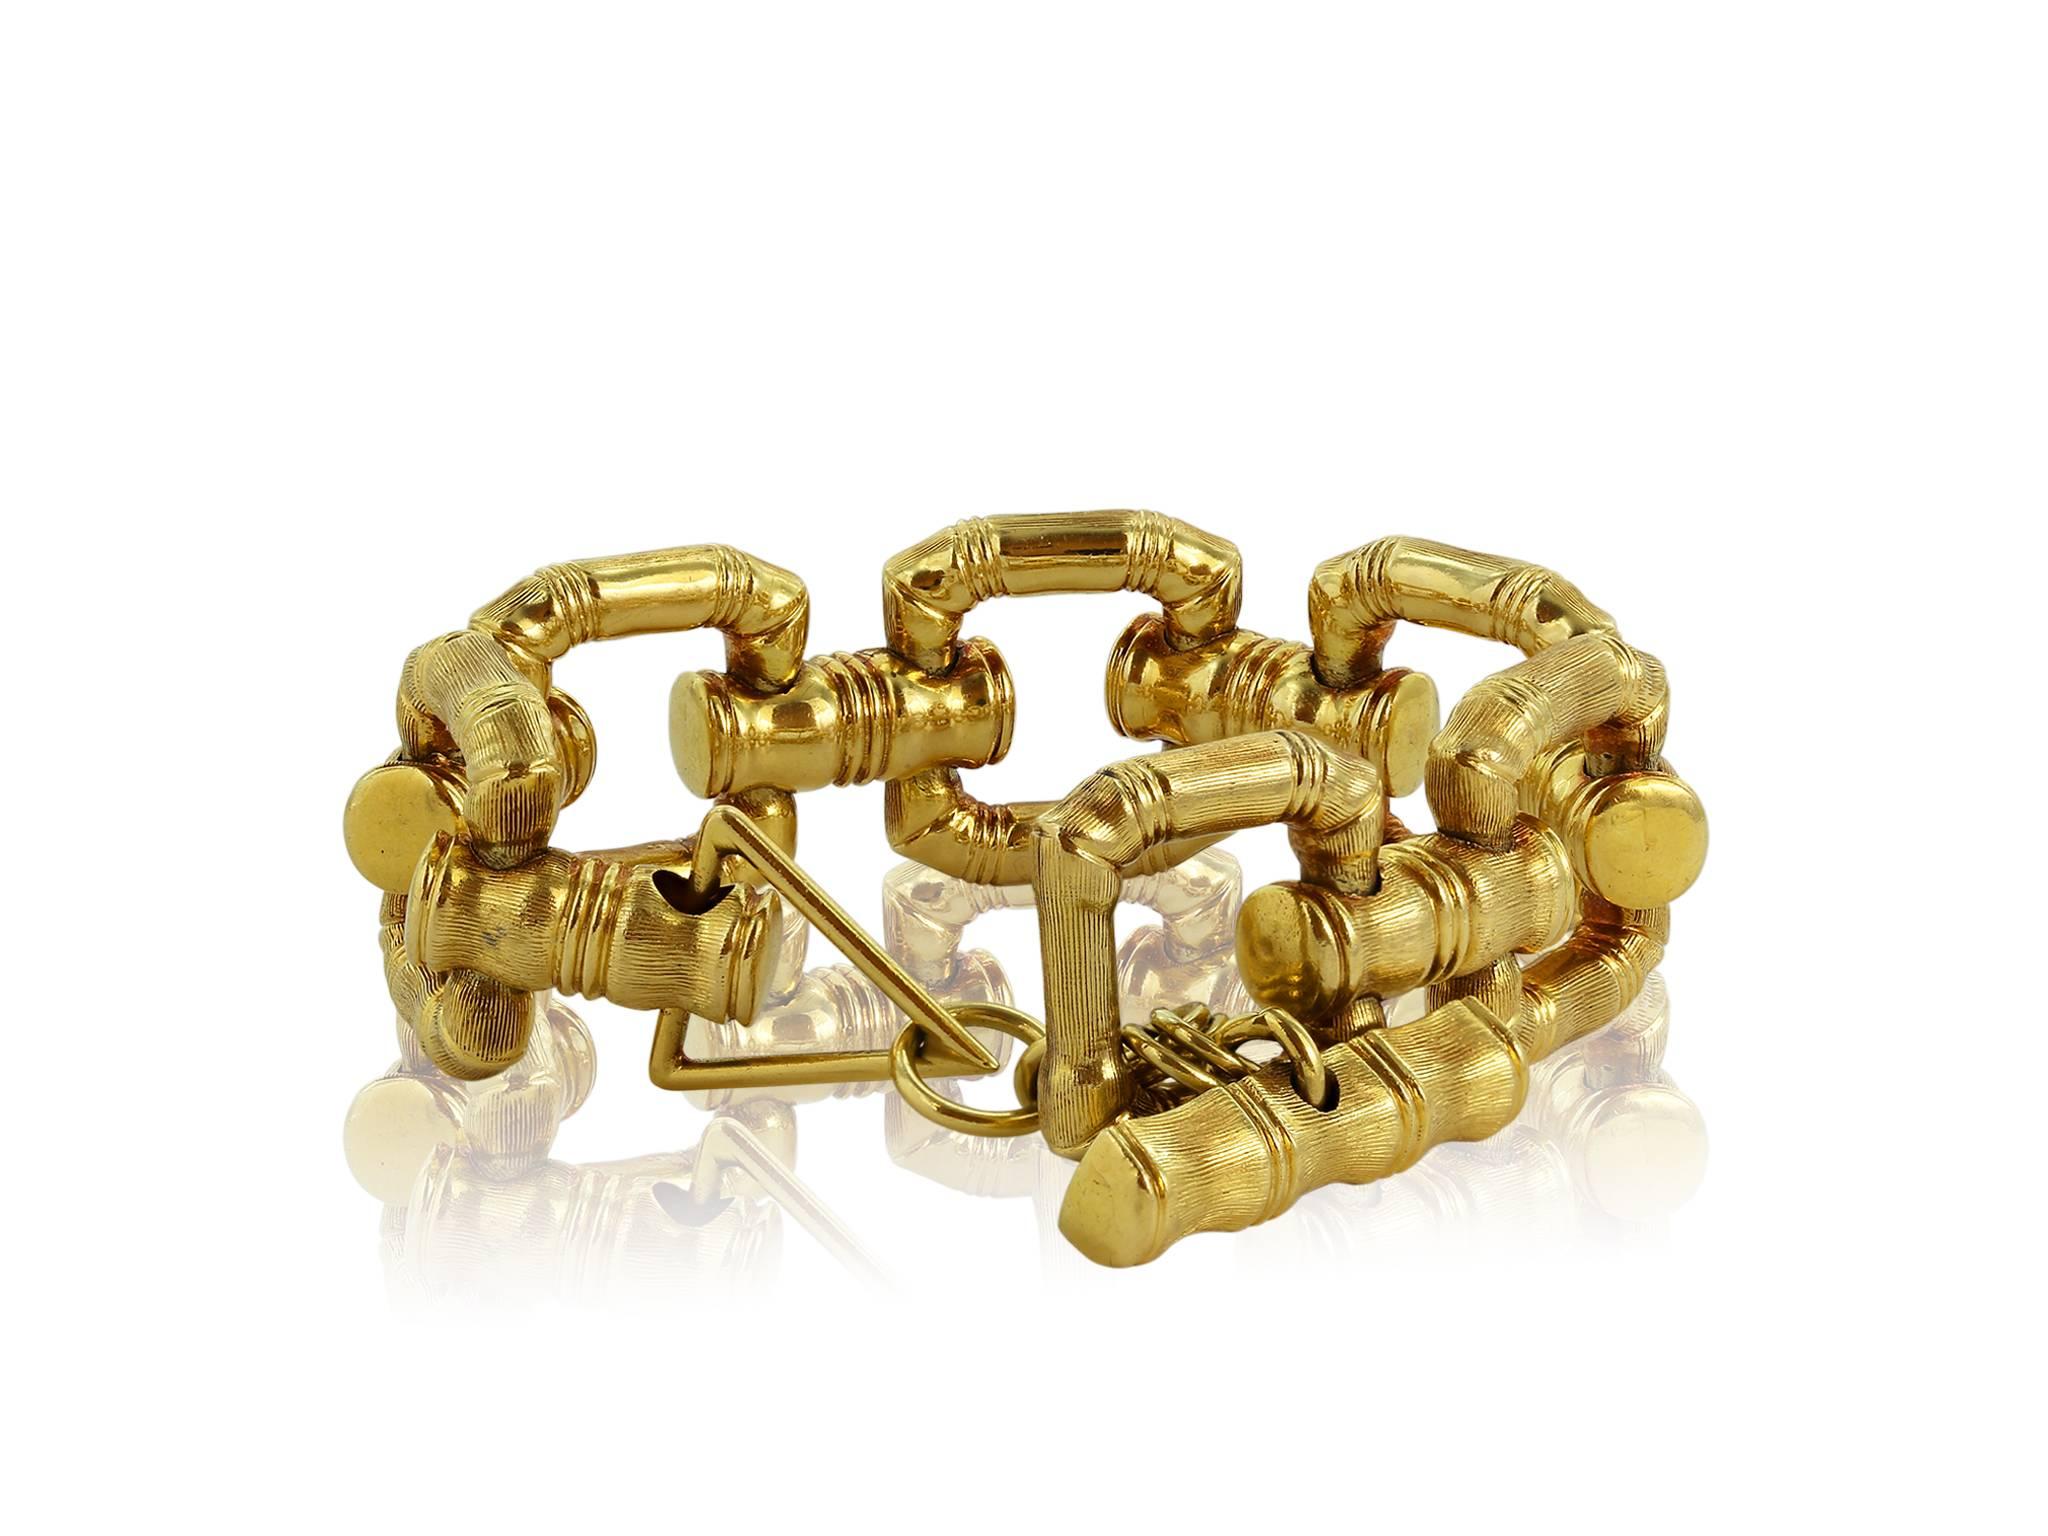 18 karat yellow gold link square link bracelet bamboo style with a toggle clasp. 8.5 inches 35.72dwt.